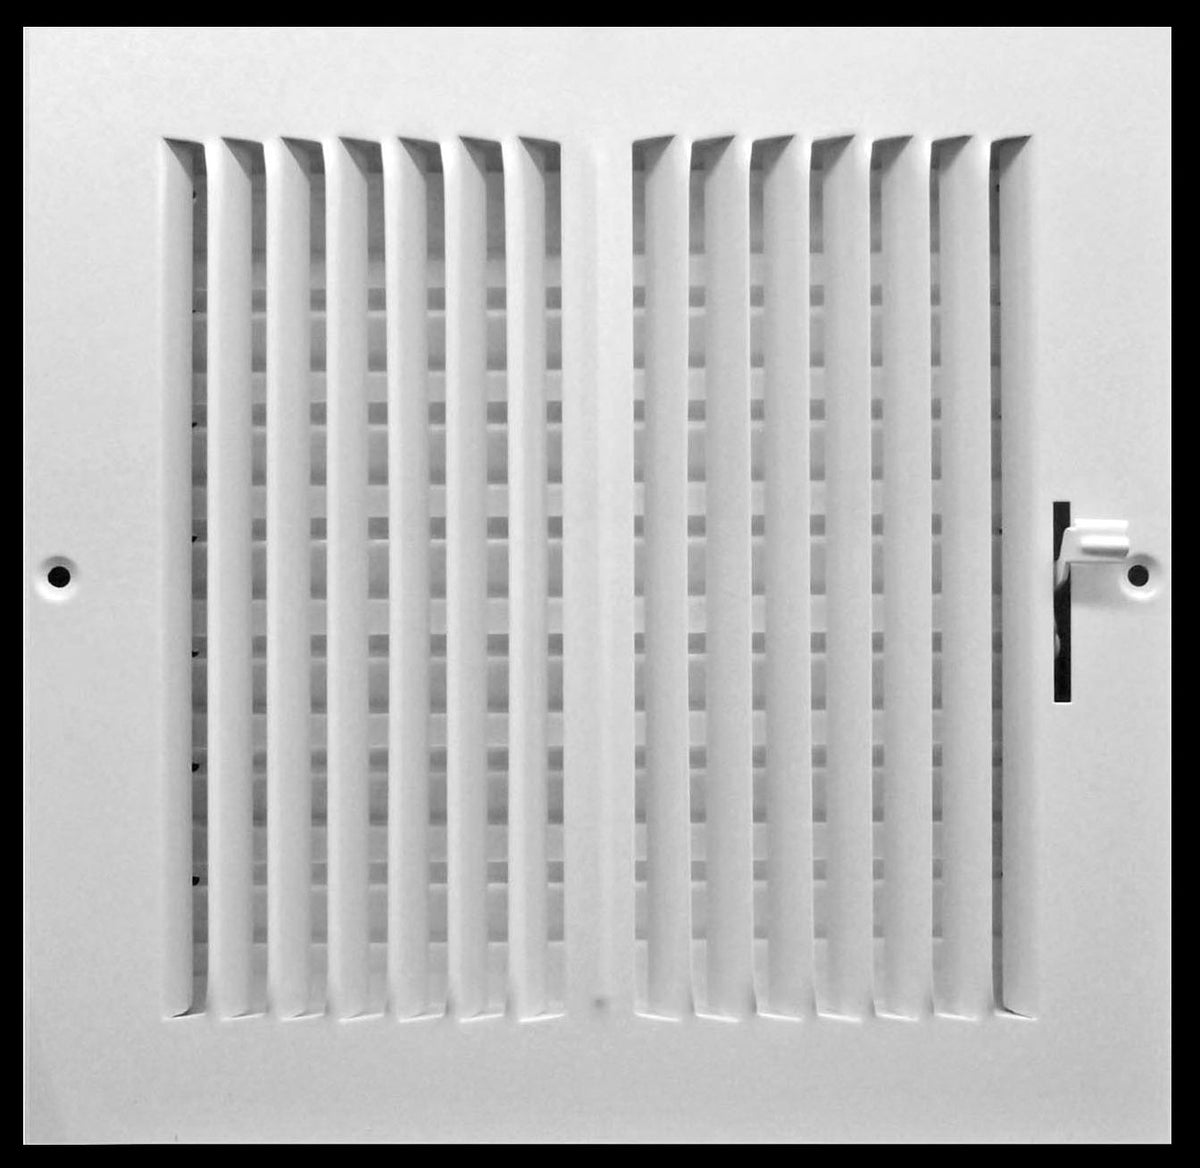 10&quot; X 10&quot; 2-Way Vertical AIR SUPPLY GRILLE - DUCT COVER &amp; DIFFUSER - Flat Stamped Face